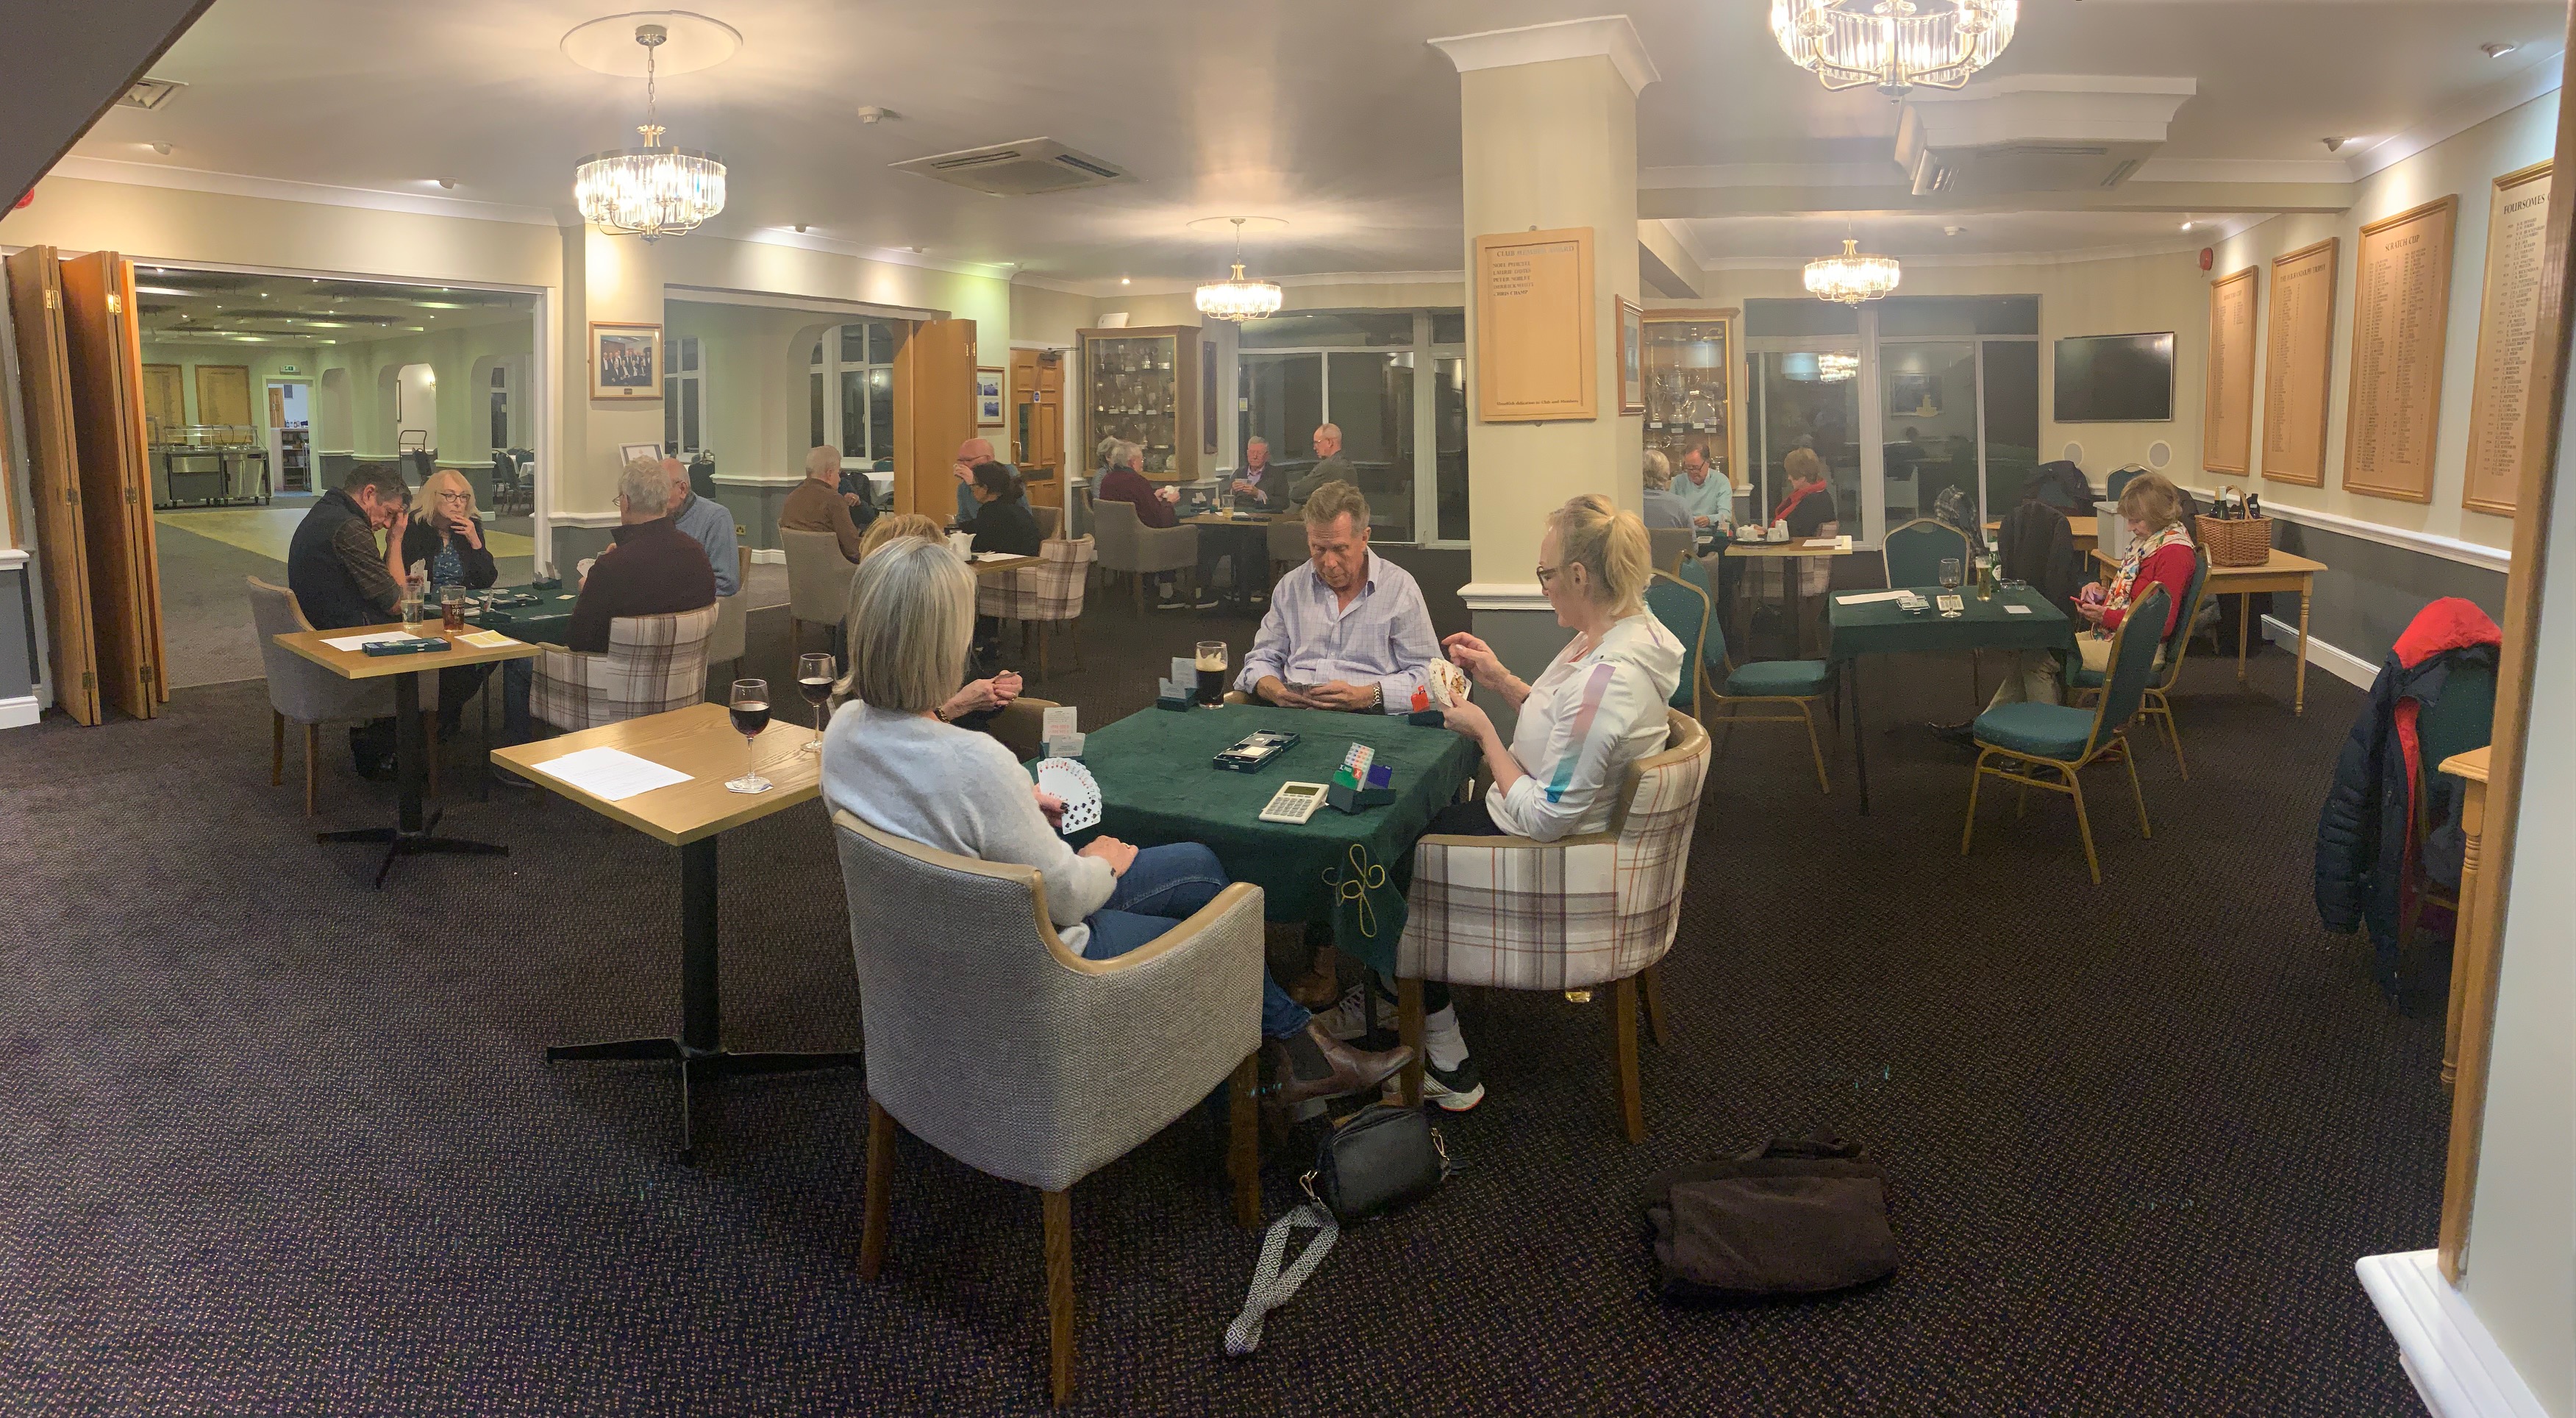 Easy Duplicate - Wednesday evenings at EGC